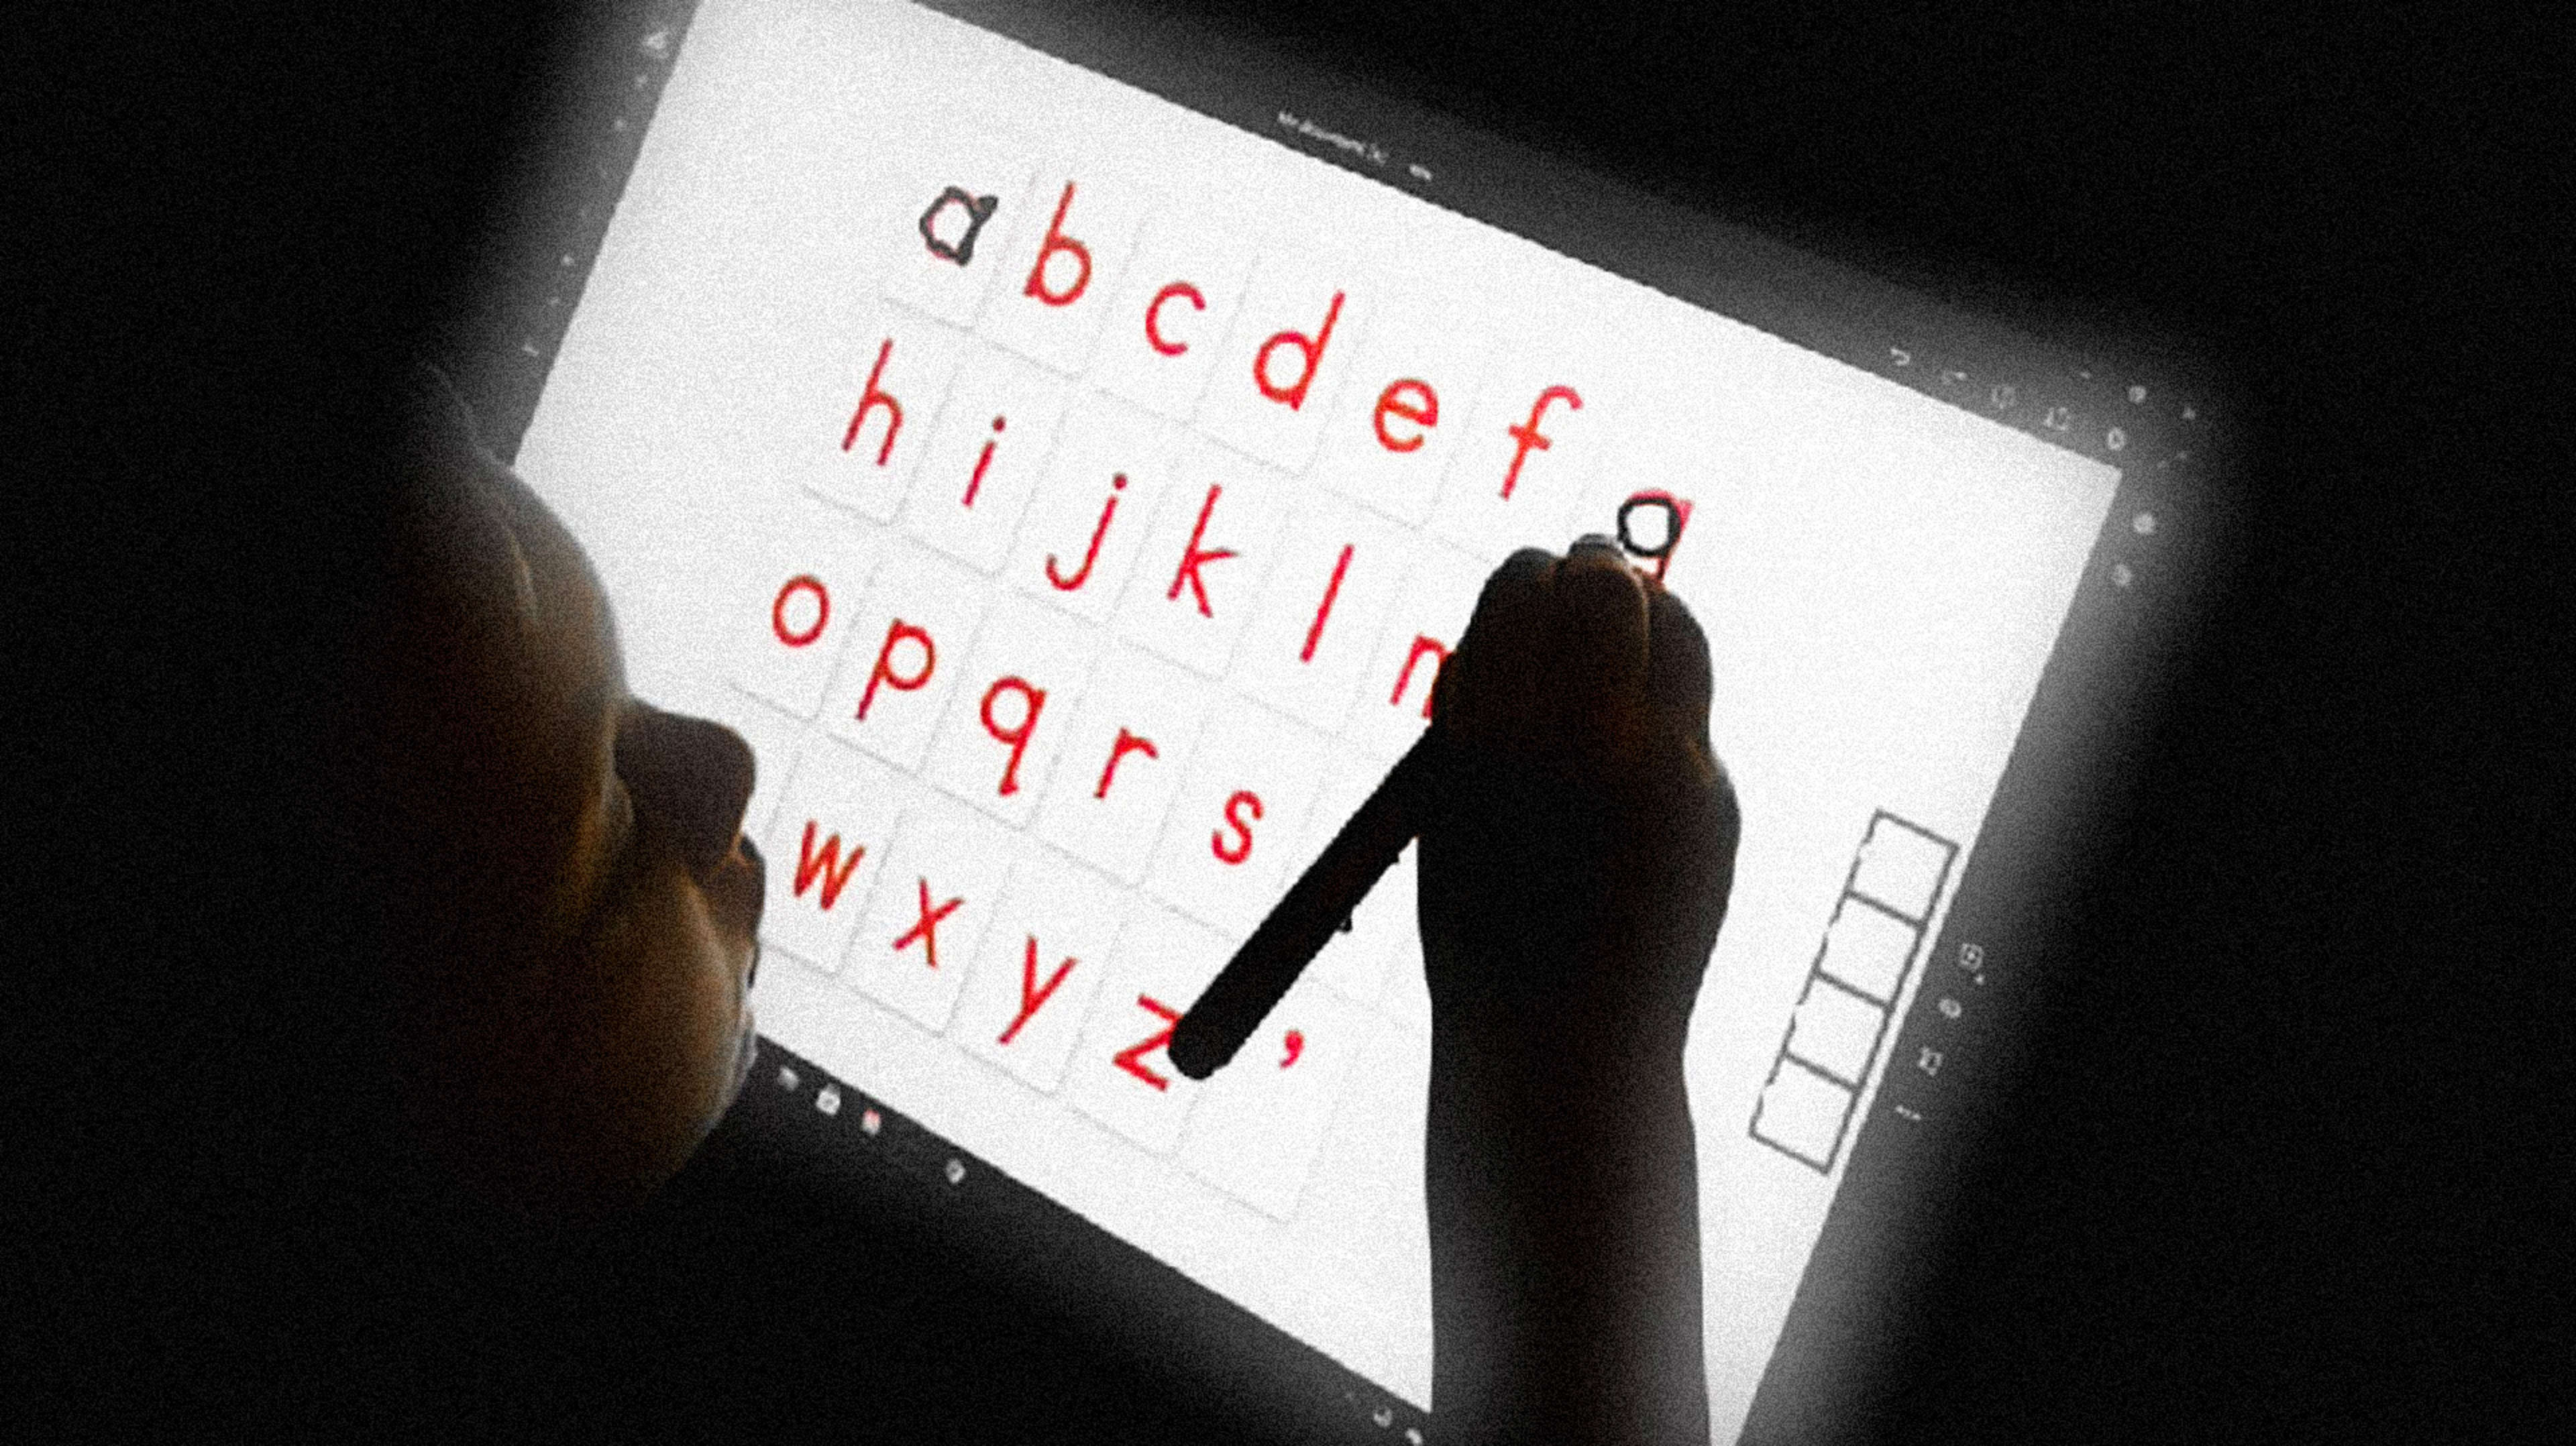 Why digital writing tools are a ‘double-edged sword’ for dyslexic kids